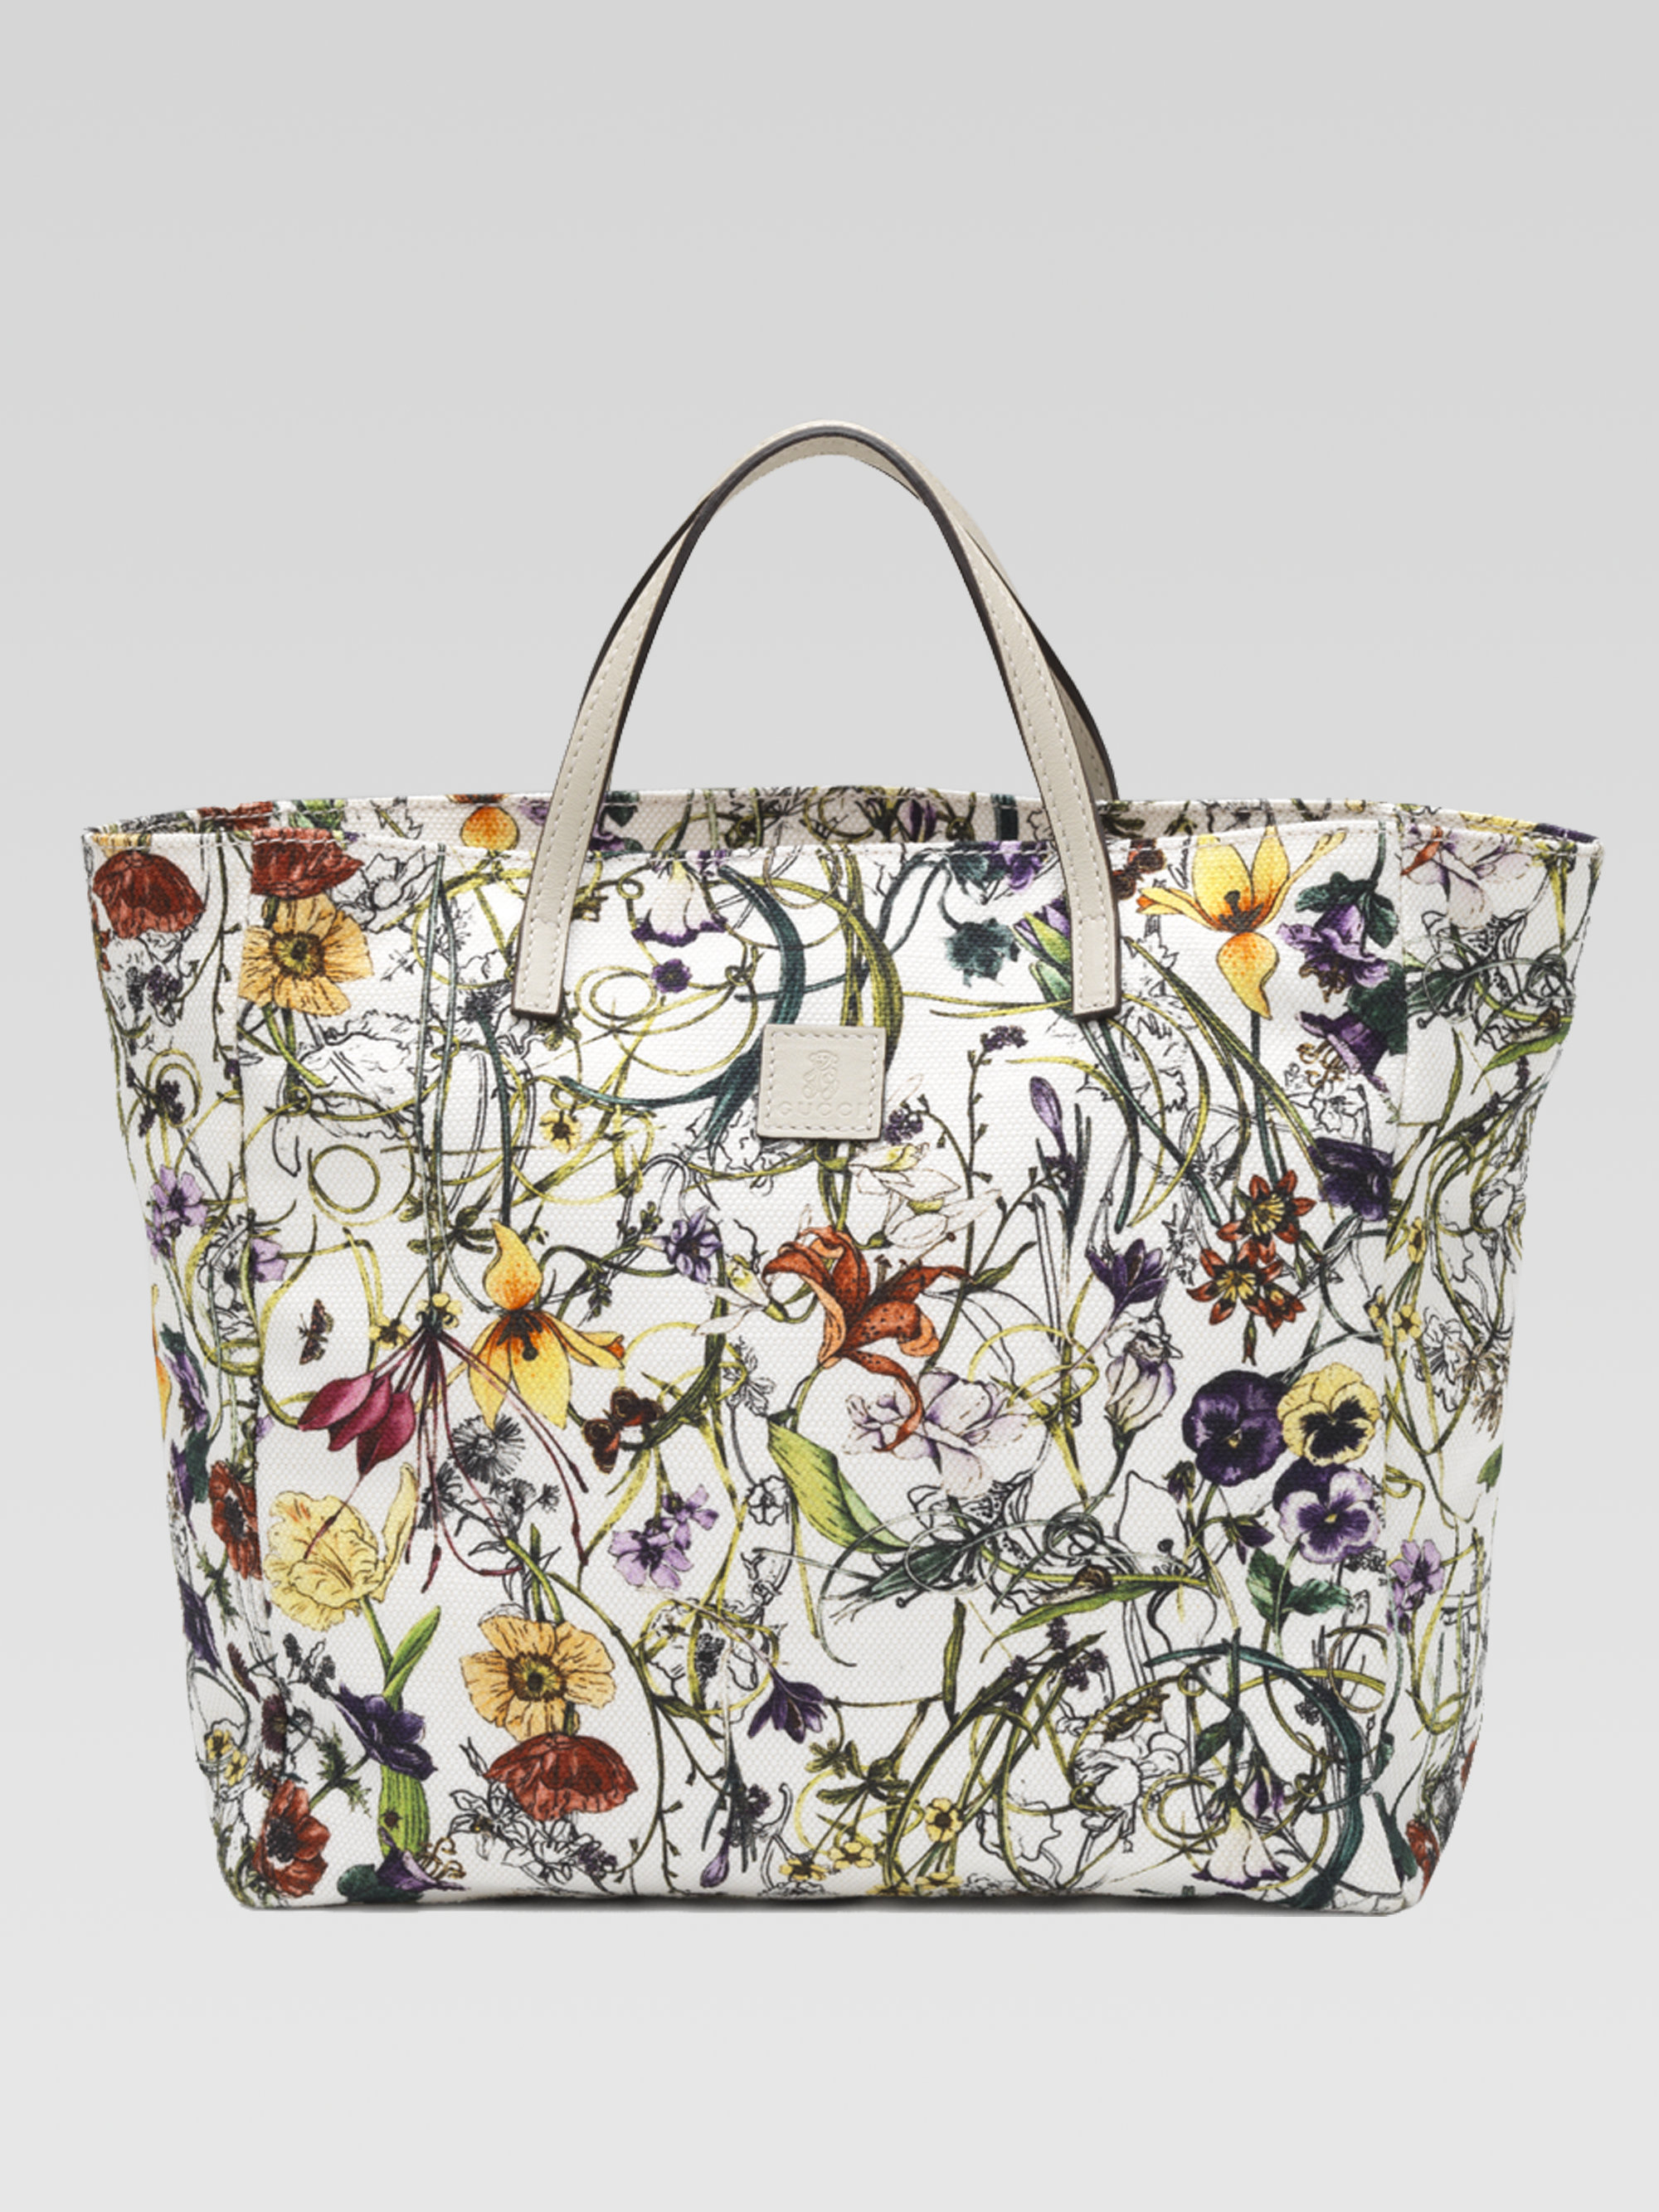 Lyst - Gucci Girls Micro Floral Infinity Canvas Tote in White